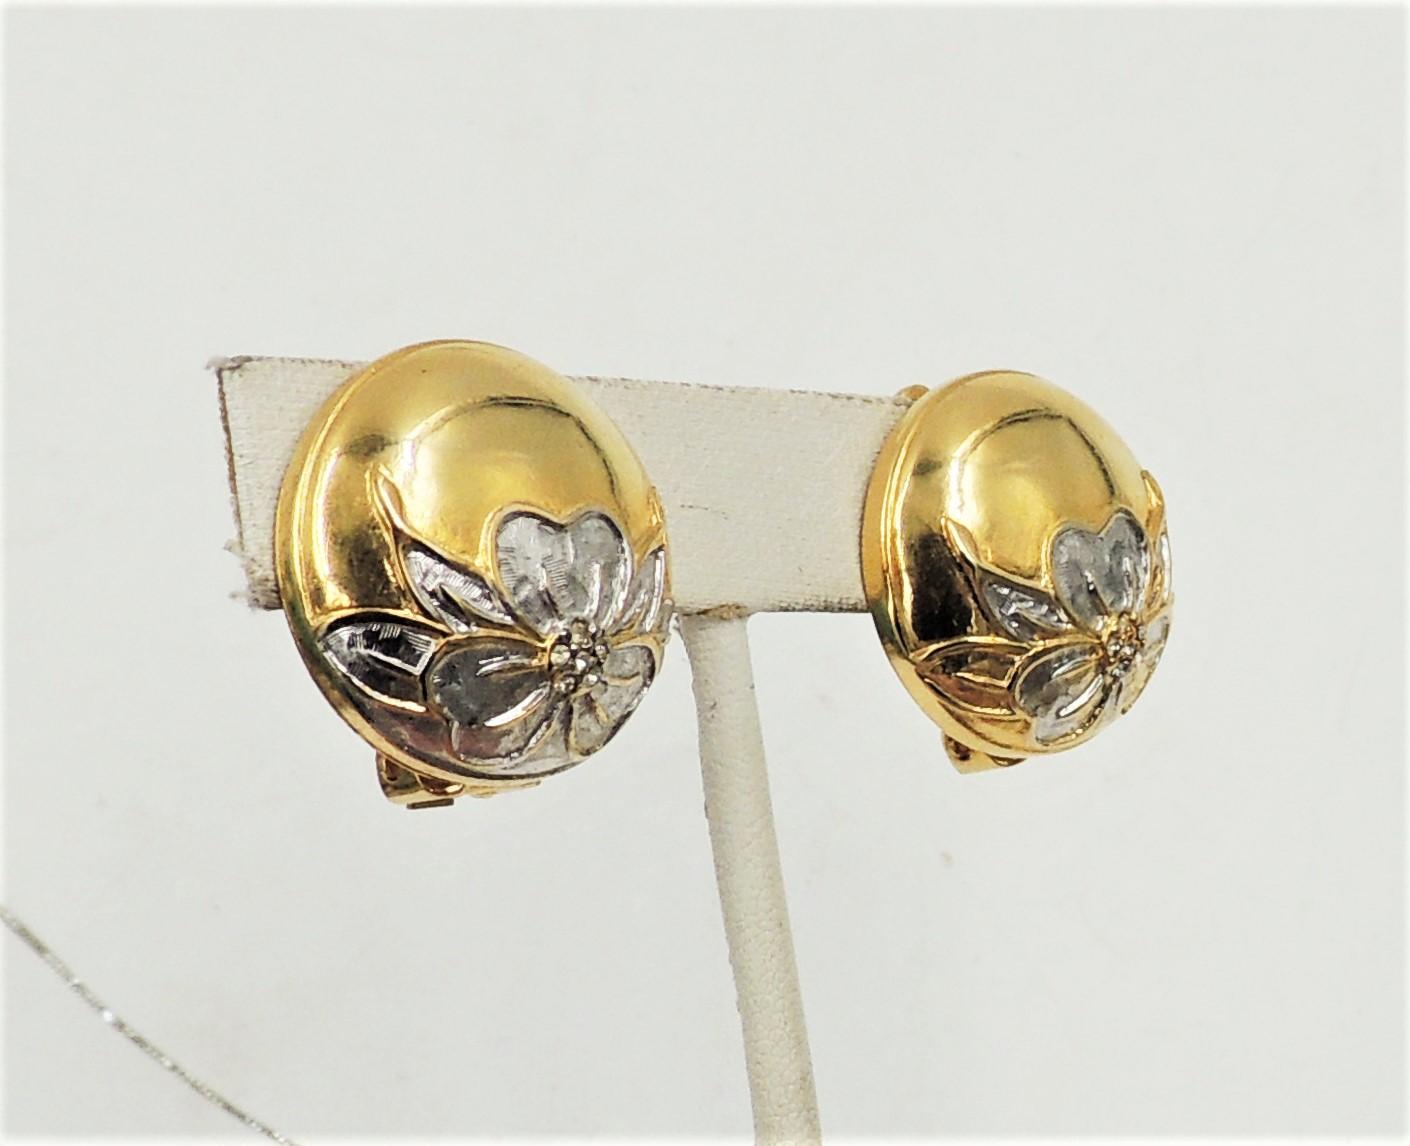 1980s round goldtone and brushed rhodium plate flowers with tiny clear round rhinestone accents clip back earrings. Marked 